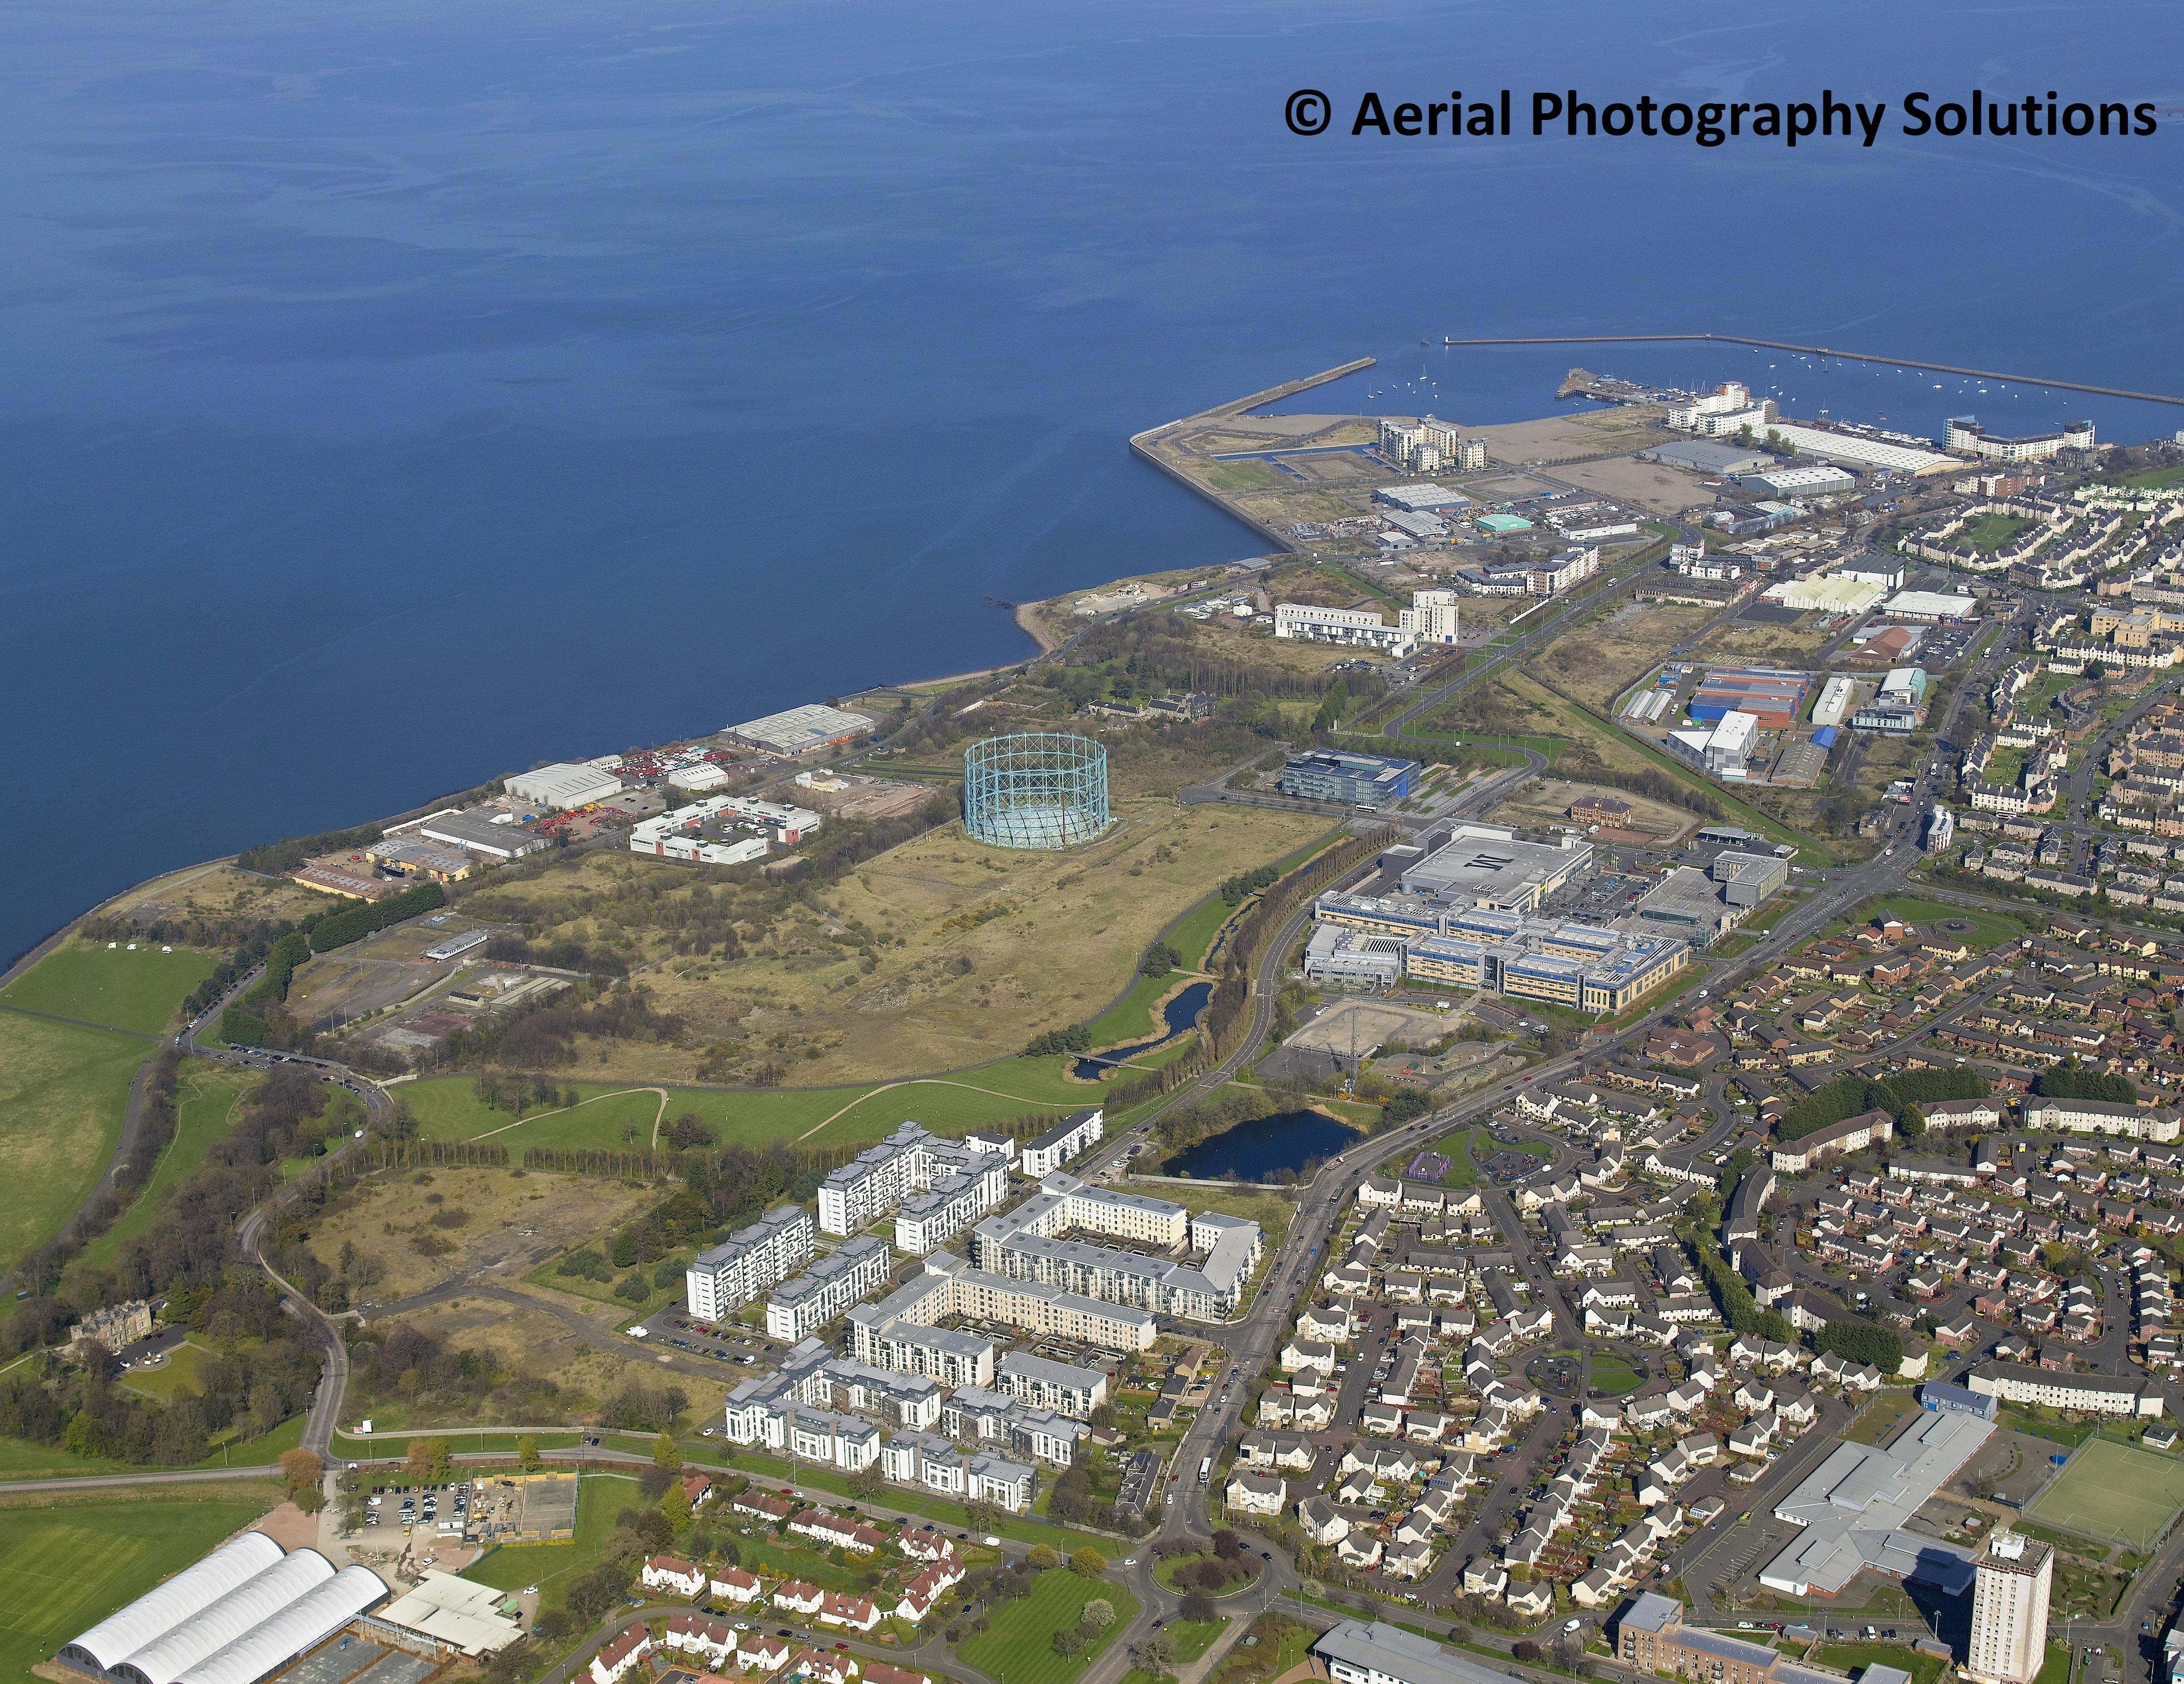 An aerial photograph of land and buildings near a river estuary.